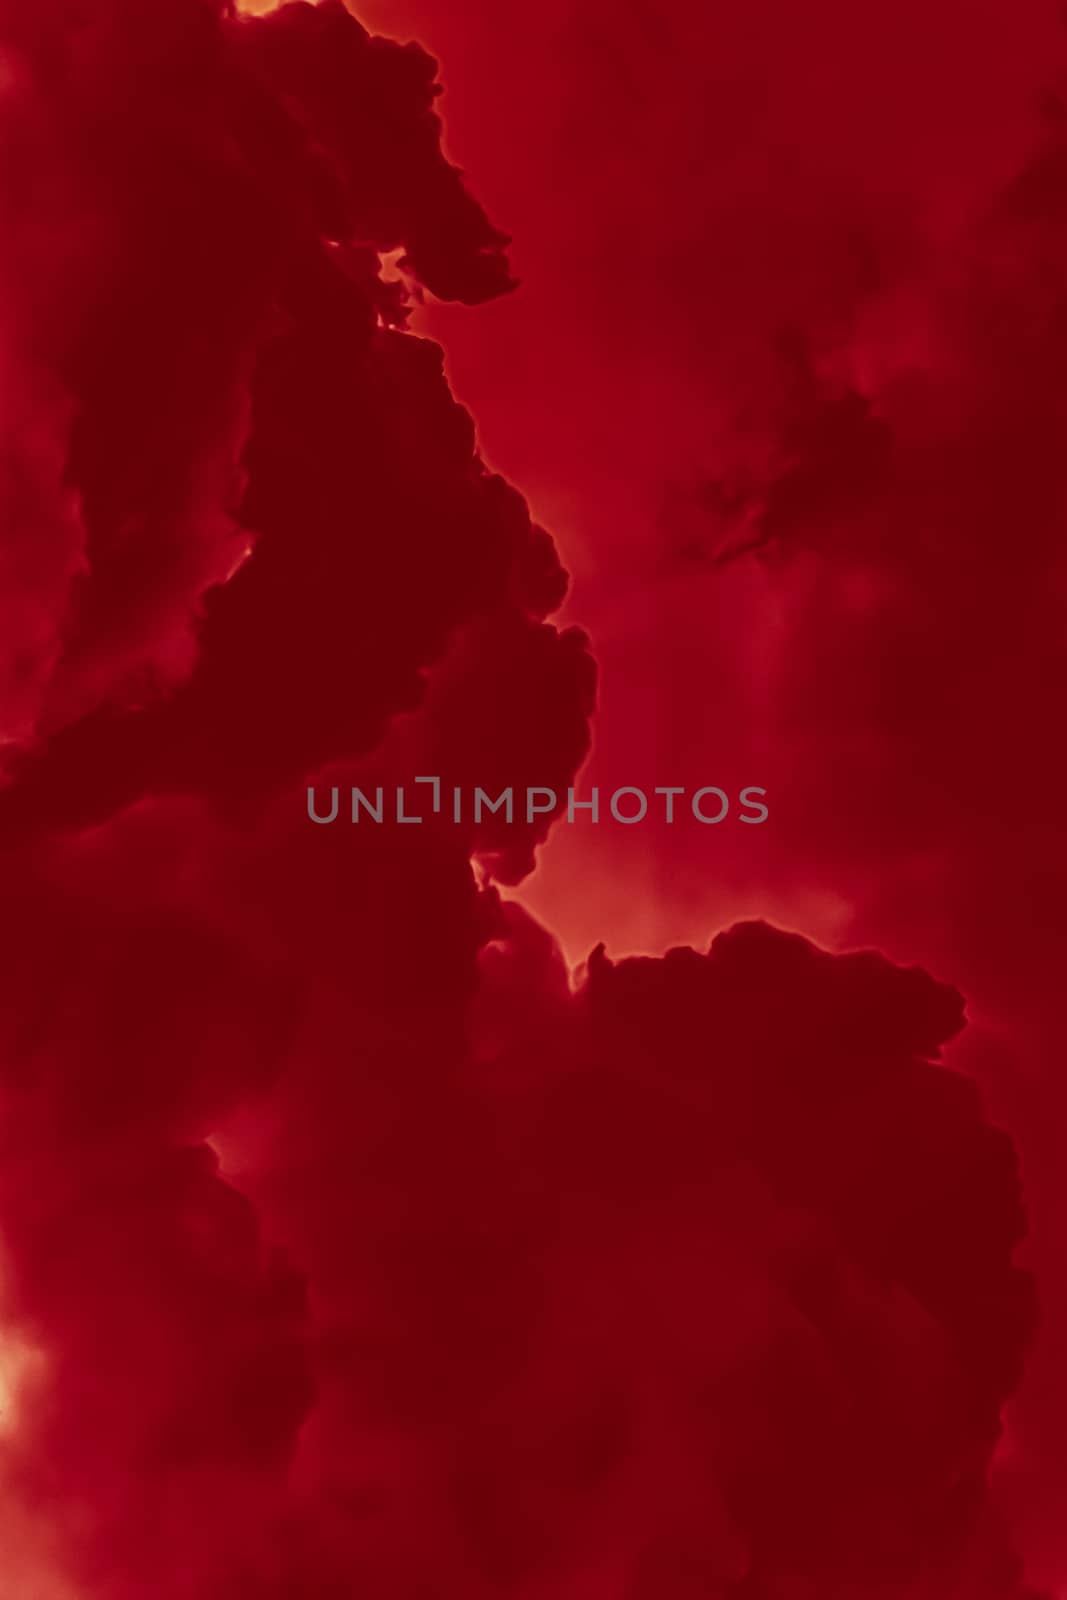 Hot fire flames or red clouds as minimalistic background design by Anneleven